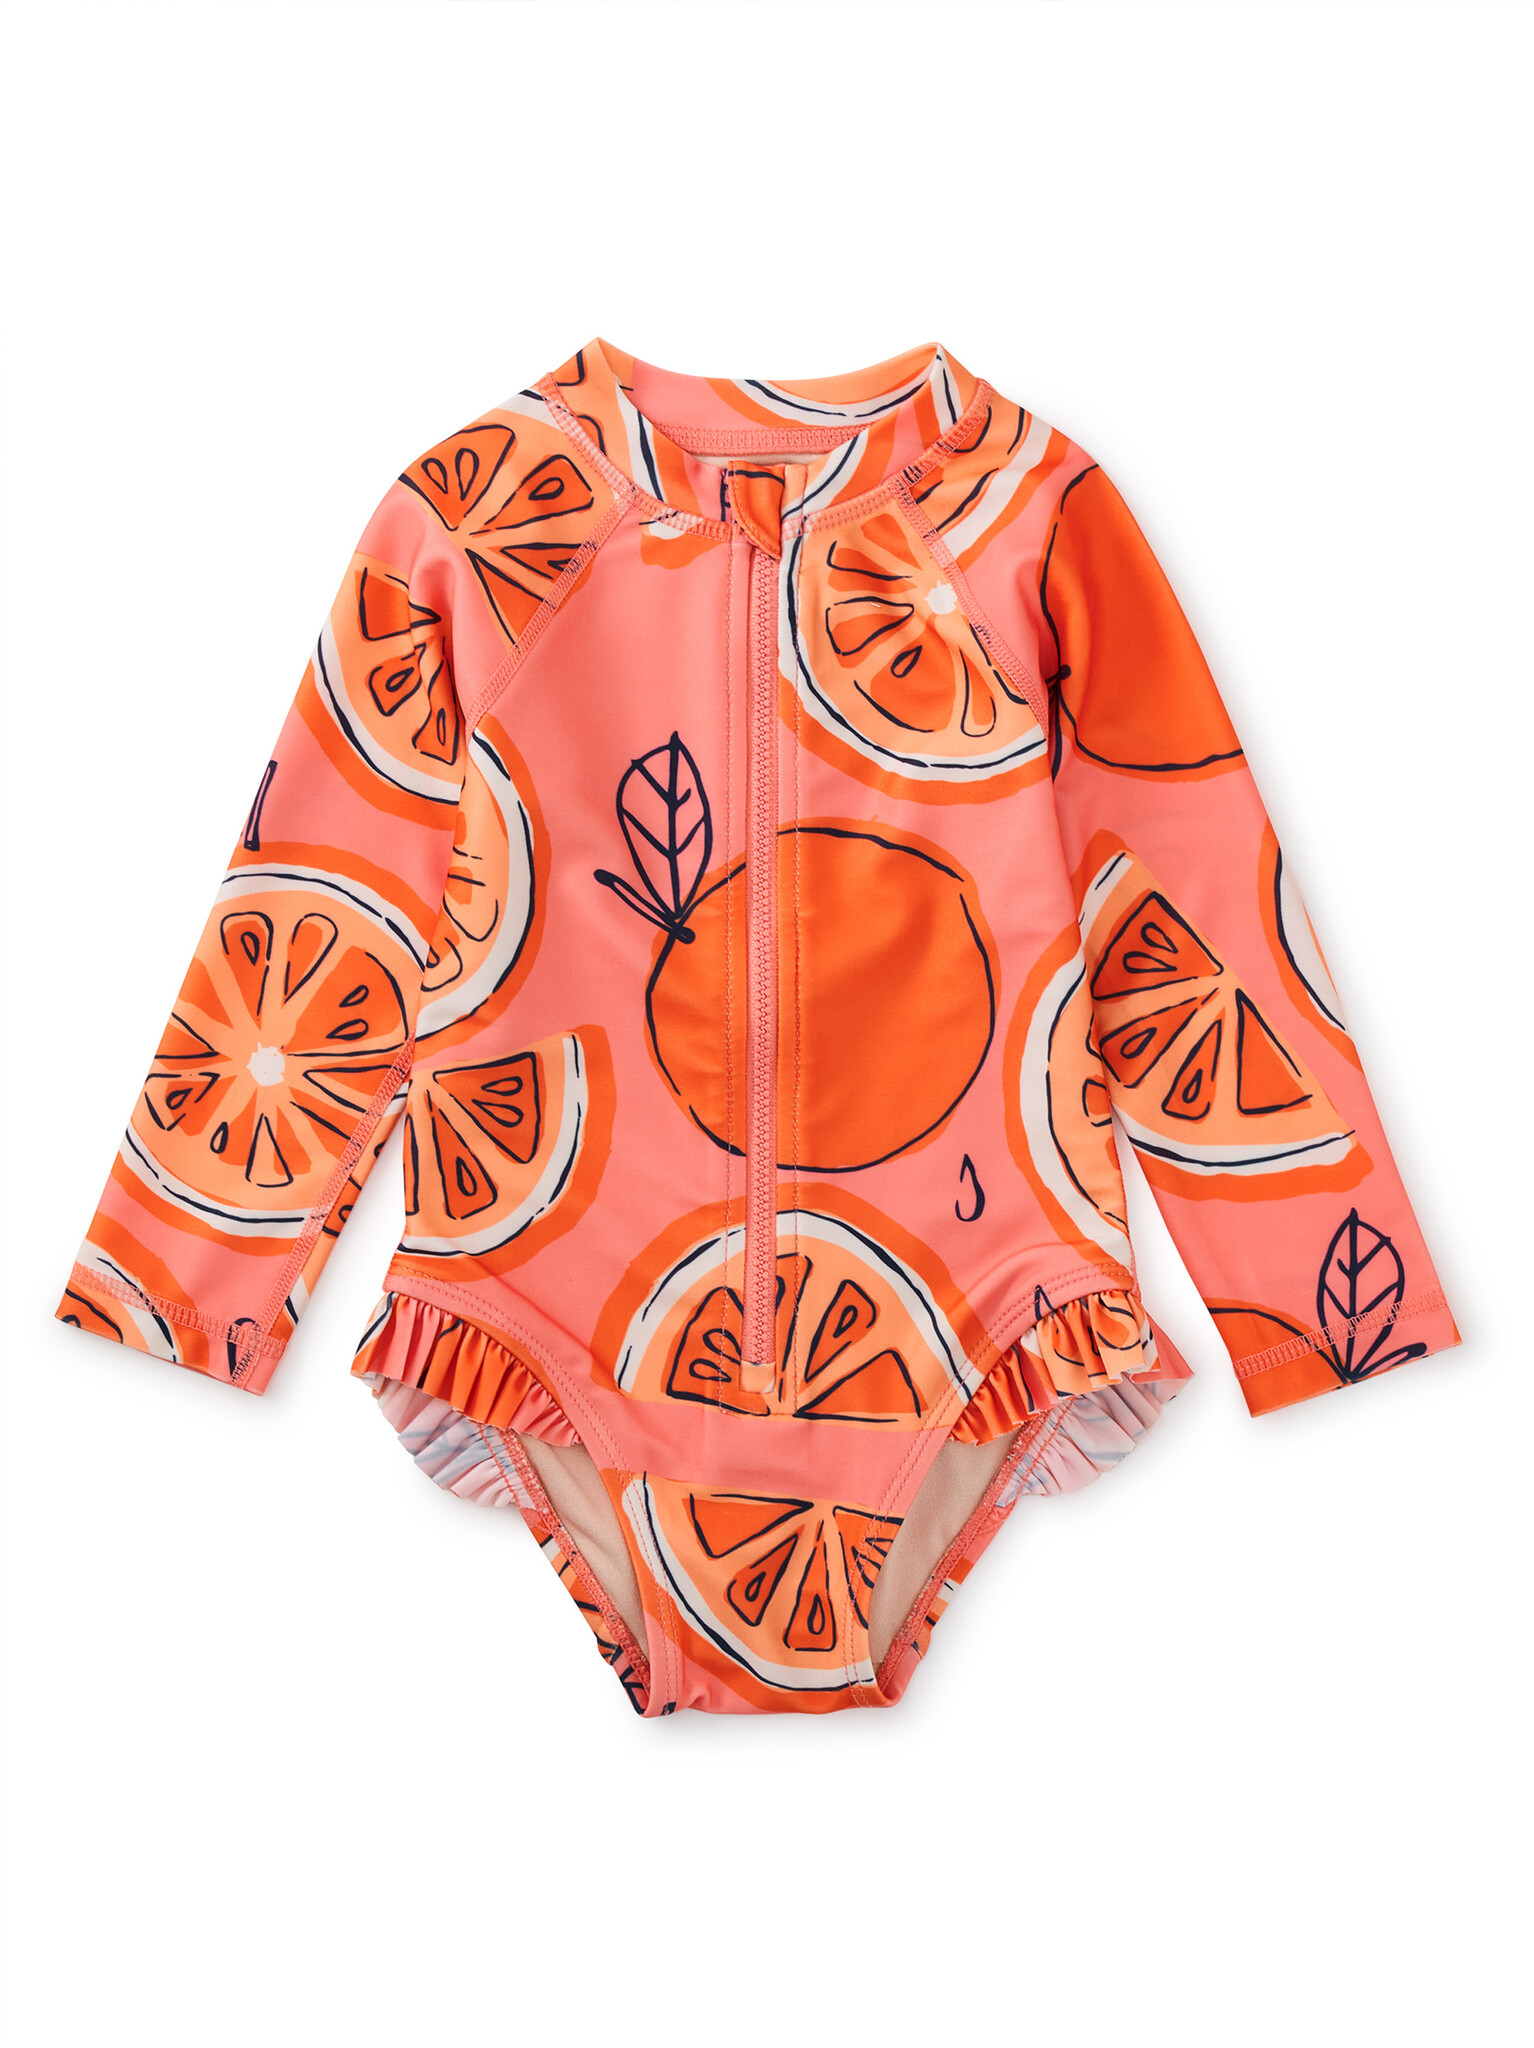 Tea Collection Long Sleeve Rash Guard One Piece - Tossed Citrus